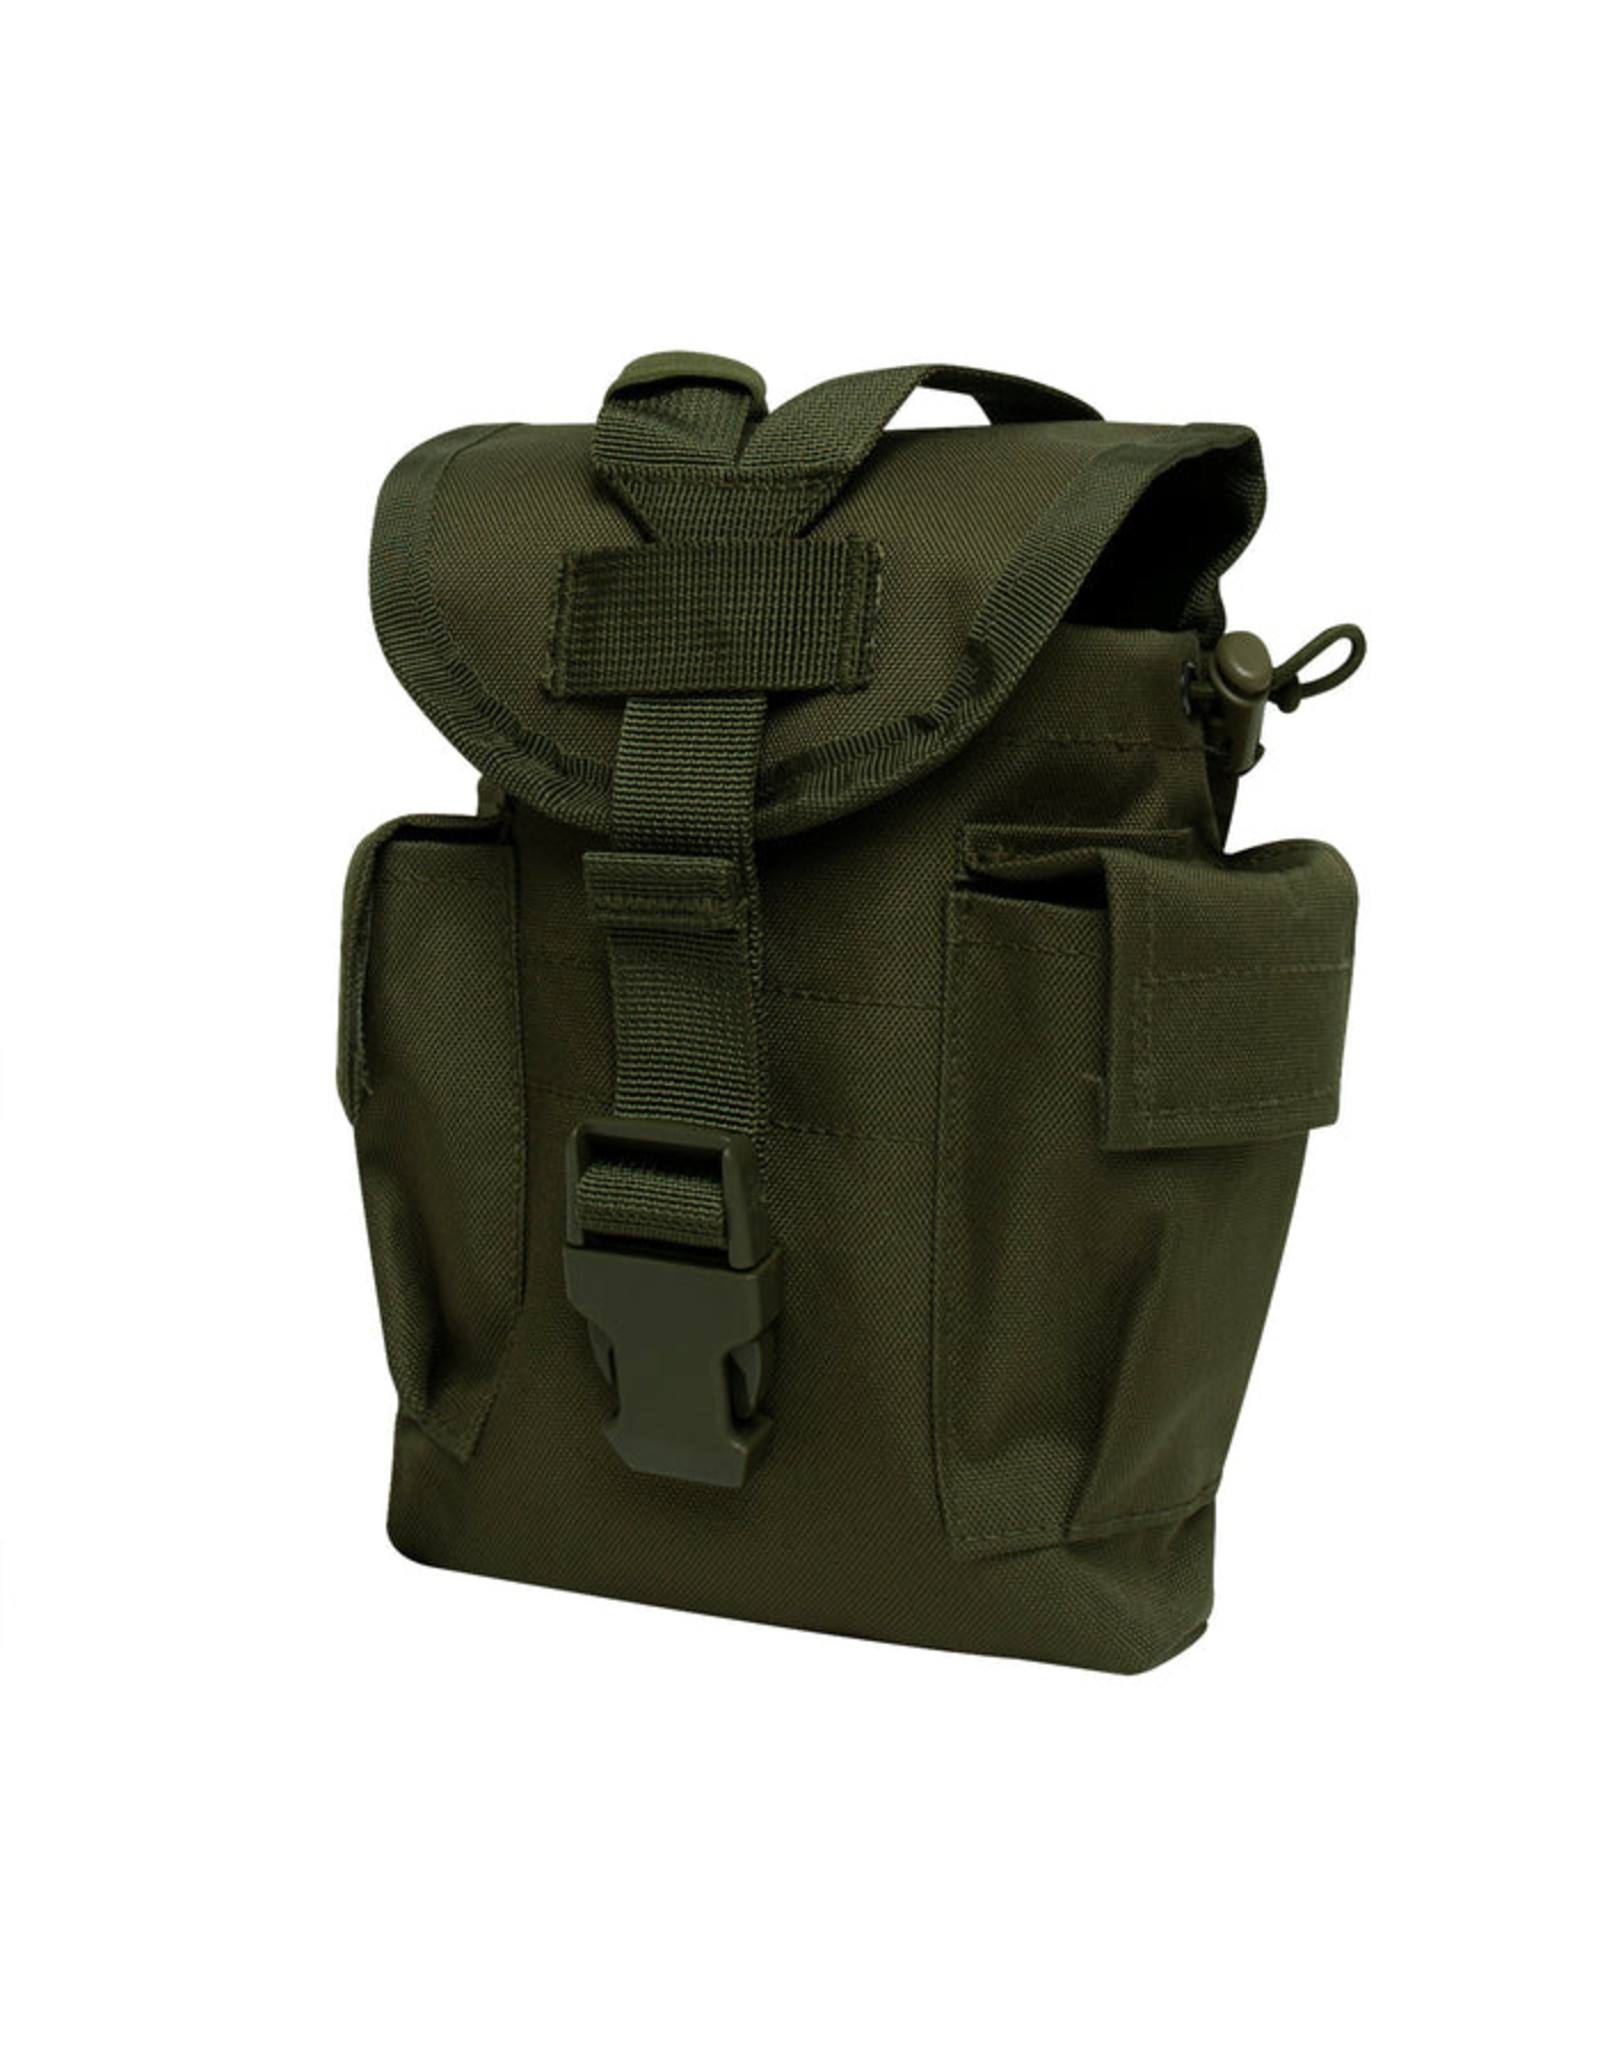 ROTHCO UTILITY POUCH/SURVIVAL KIT